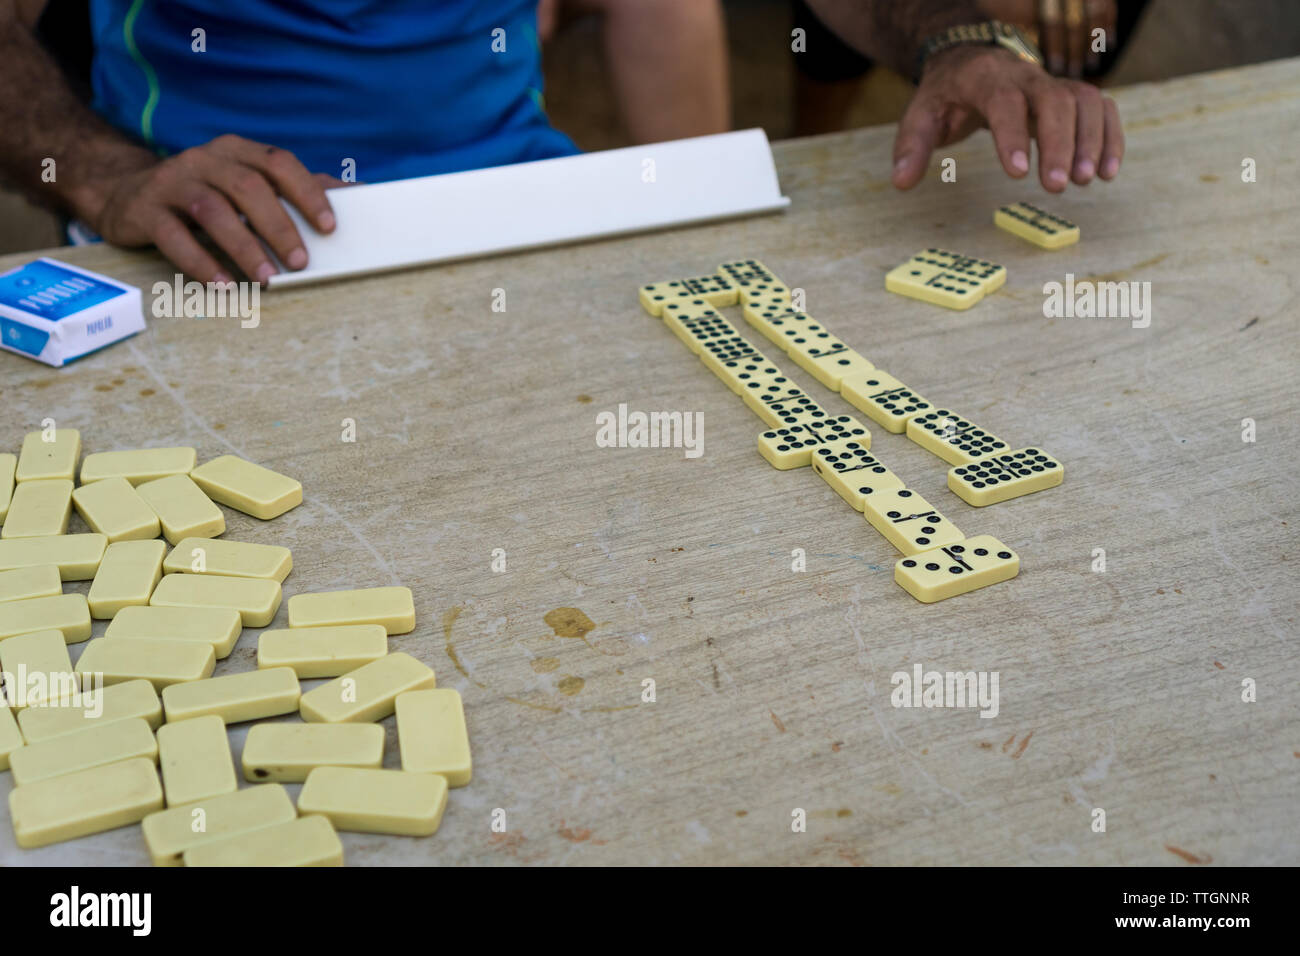 Gentlemen playing a mean game of dominoes. Trinidad, Cuba. 2017 Stock Photo